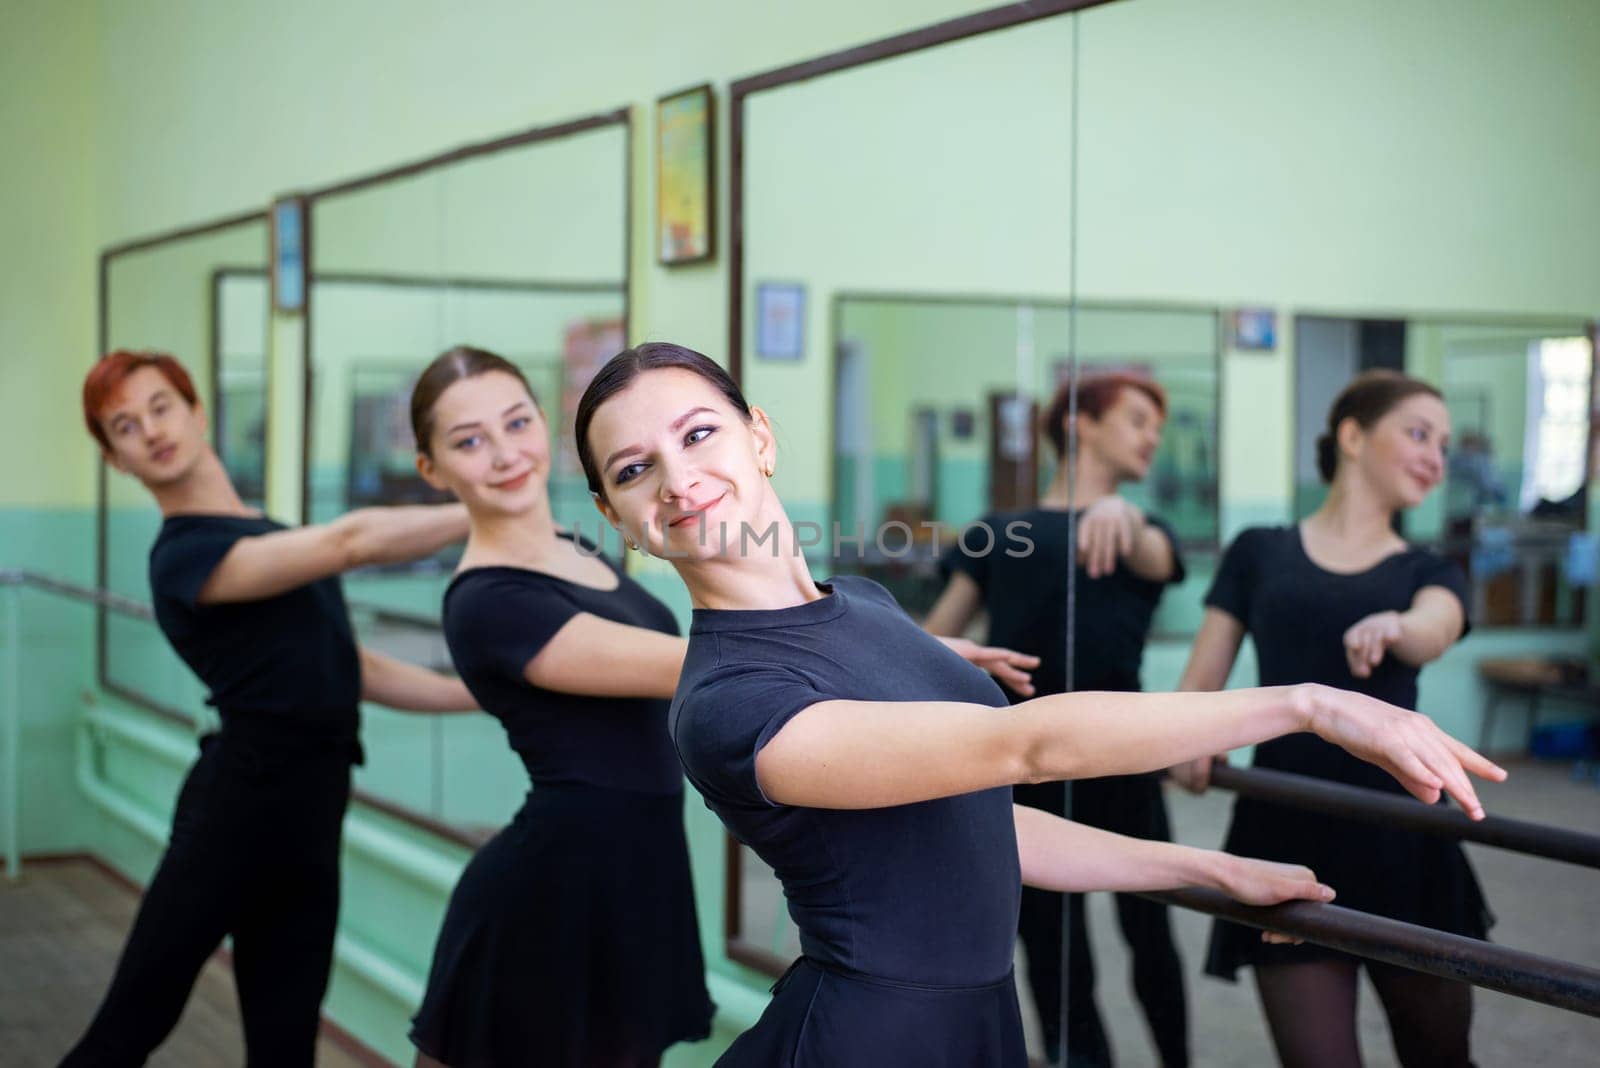 Students on the way to become professional dancers by VitaliiPetrushenko